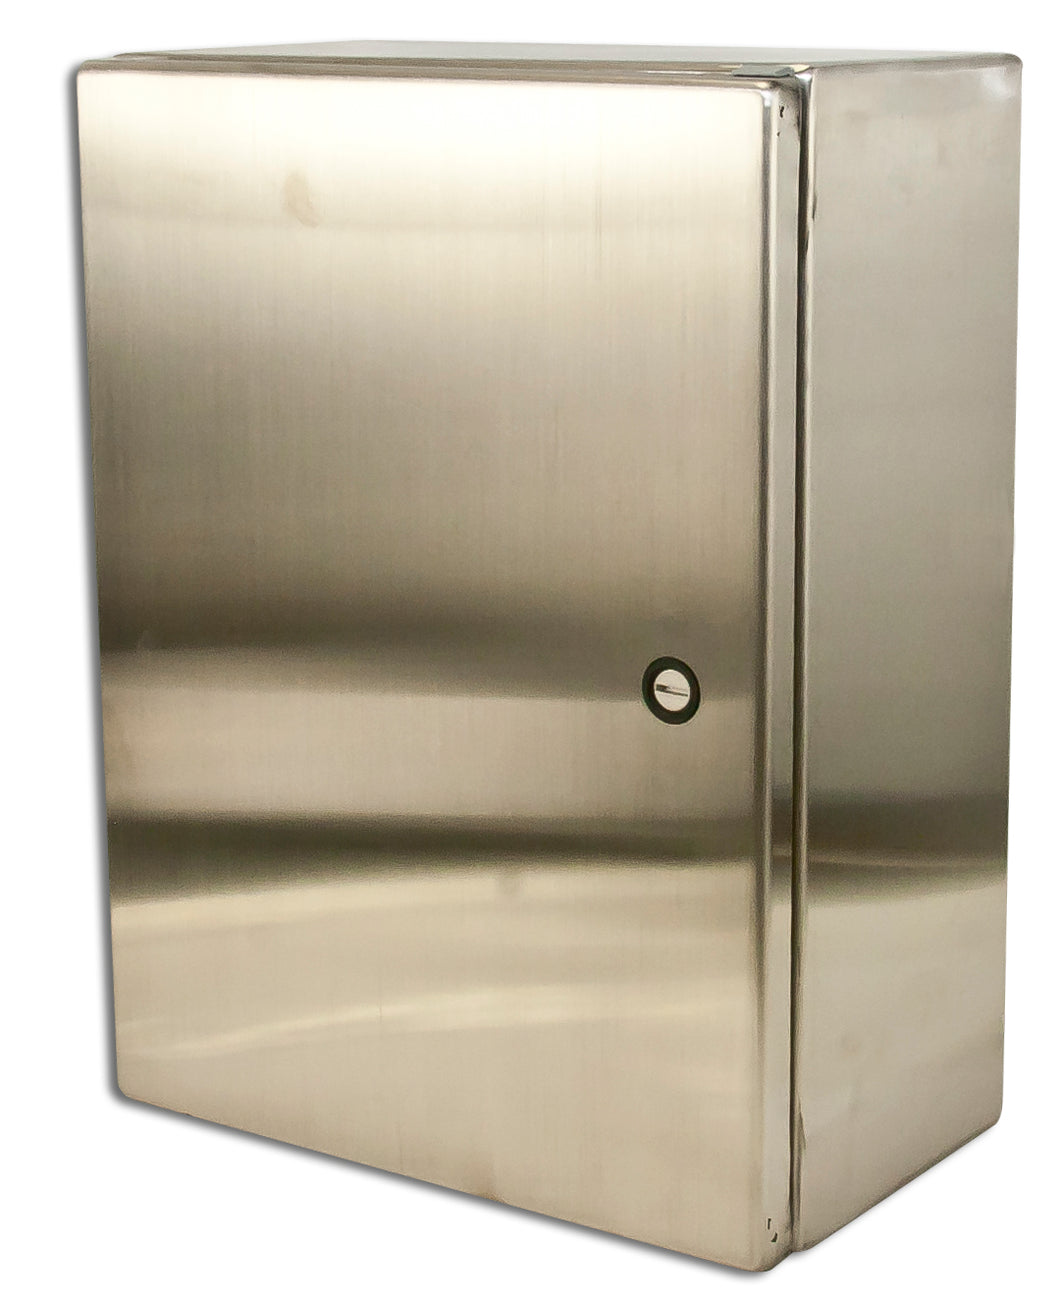 nVent Hoffman CSD16126SS Enclosure, NEMA 4X, Hinged Cover, Stainless Steel, 16